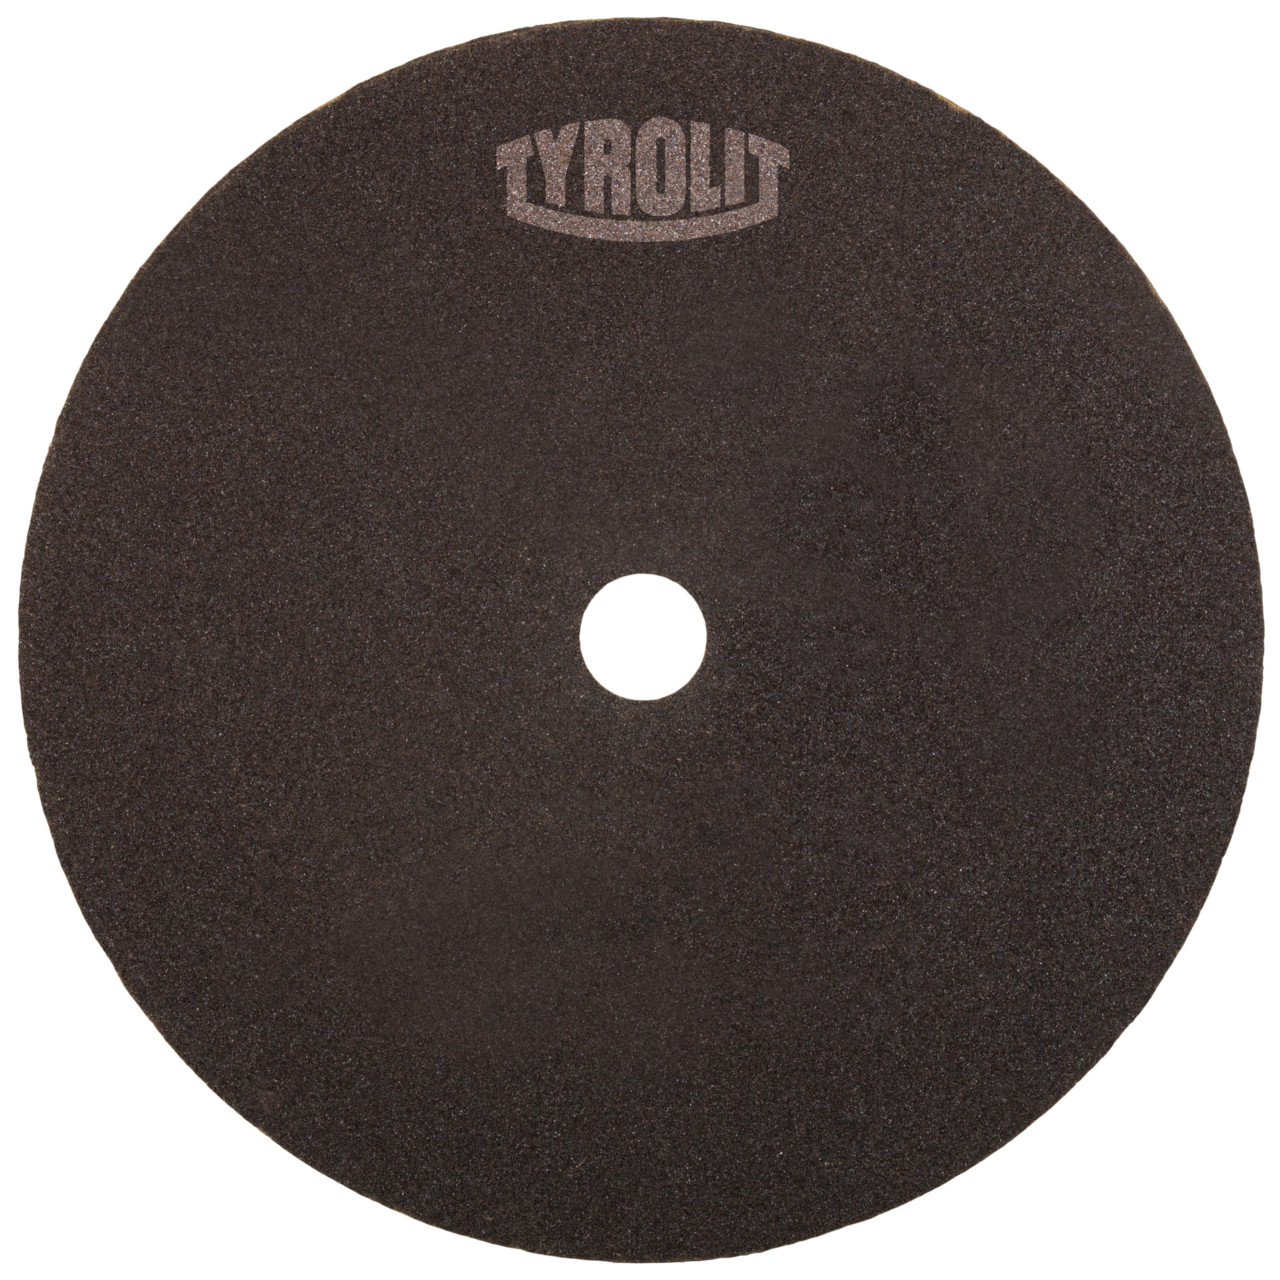 TYROLIT cut-off wheel for cutting and saw sharpening DxDxH 250x1.6x32 For steel and HSS, shape: 41N - straight version (non-woven cut-off wheel), Art. 834839